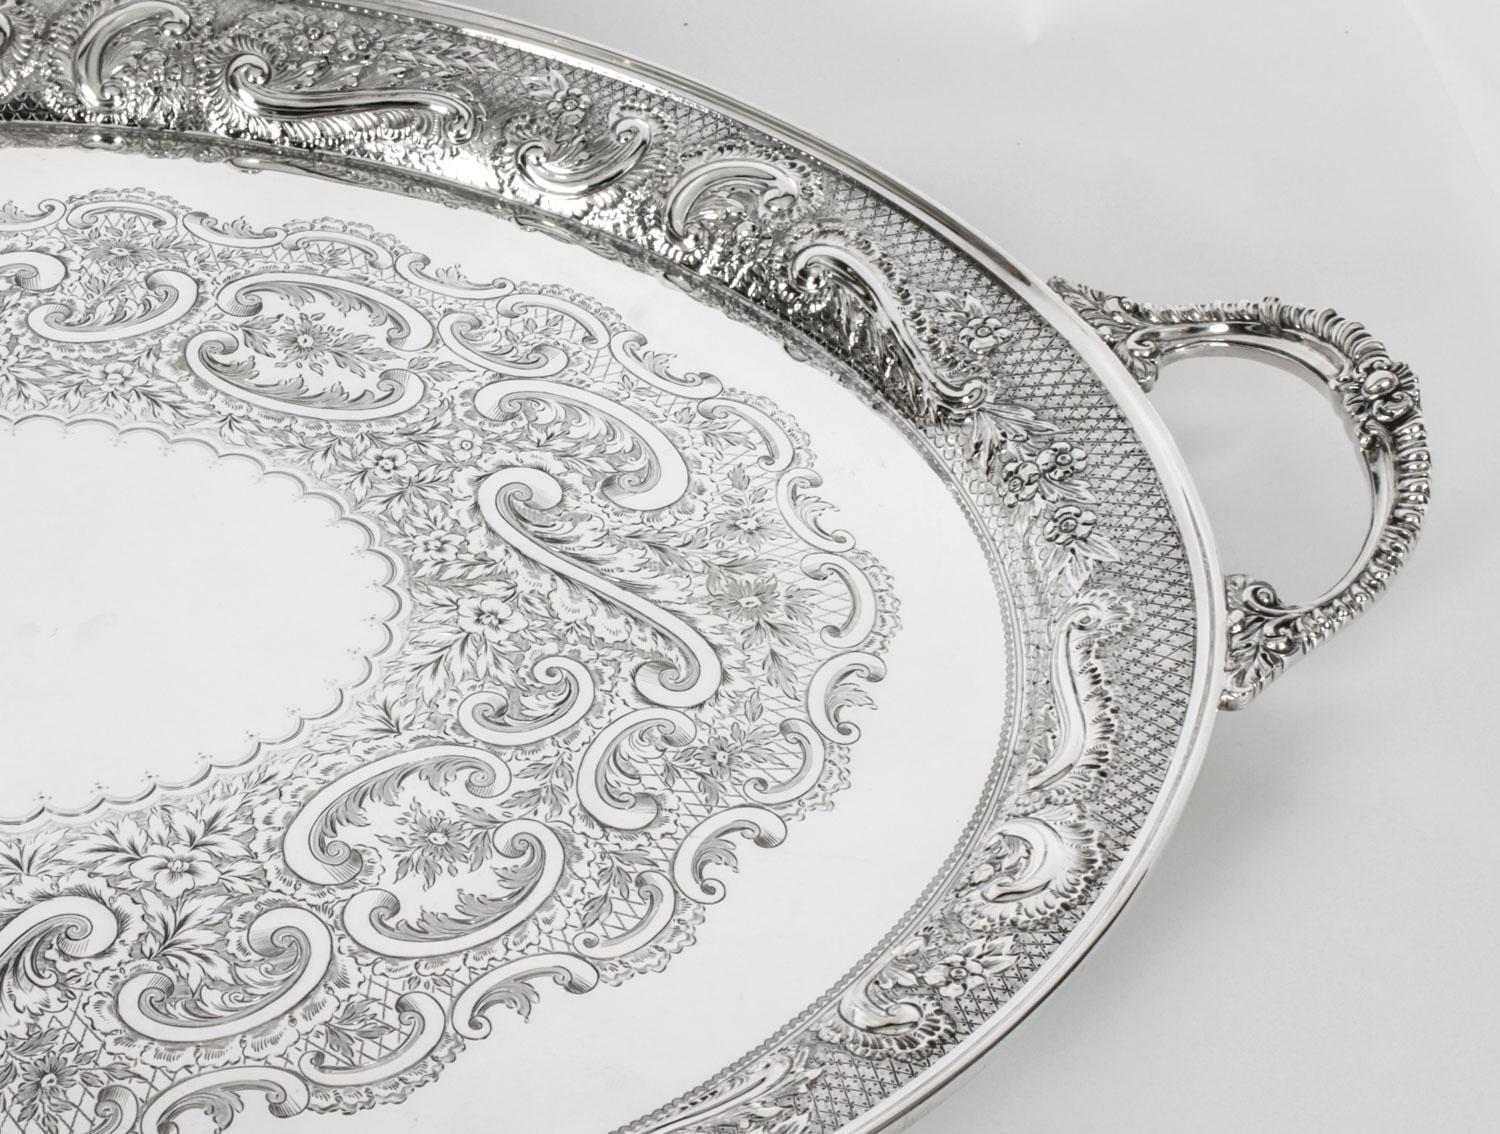 Antique Oval Victorian Silver Plated Tray by Mappin & Webb, 19th Century 2